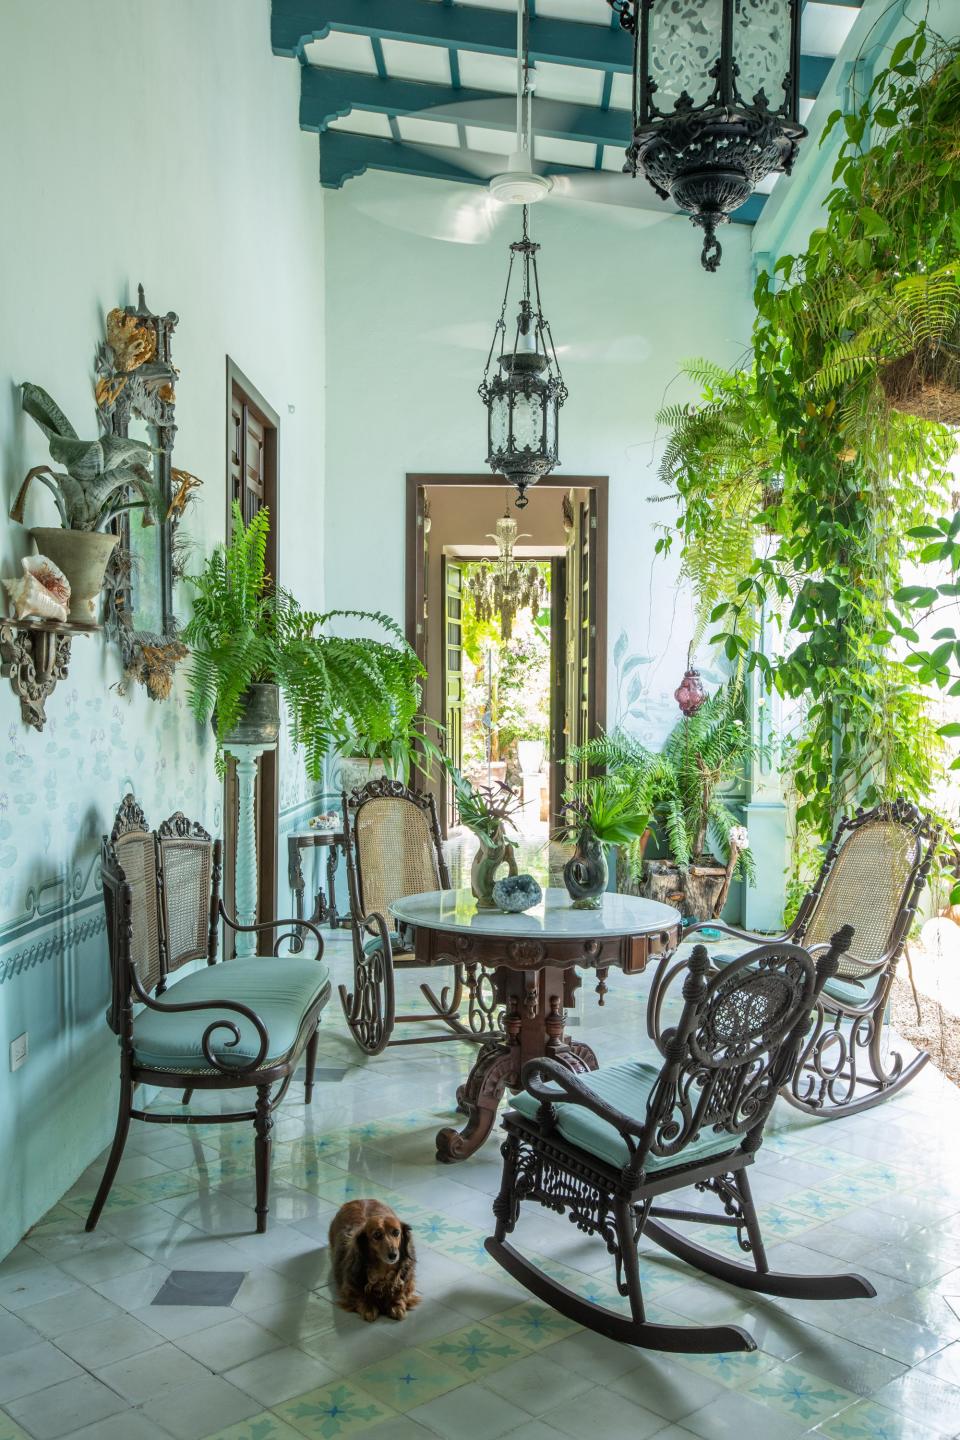 Another portion of the patio contains a sitting area featuring an Austrian bentwood settee circa 1910, a pair of Thonet rocking chairs, and another wicker pair that are antique. “This space is meant to take you back in time, to 1900,” says Skouras.